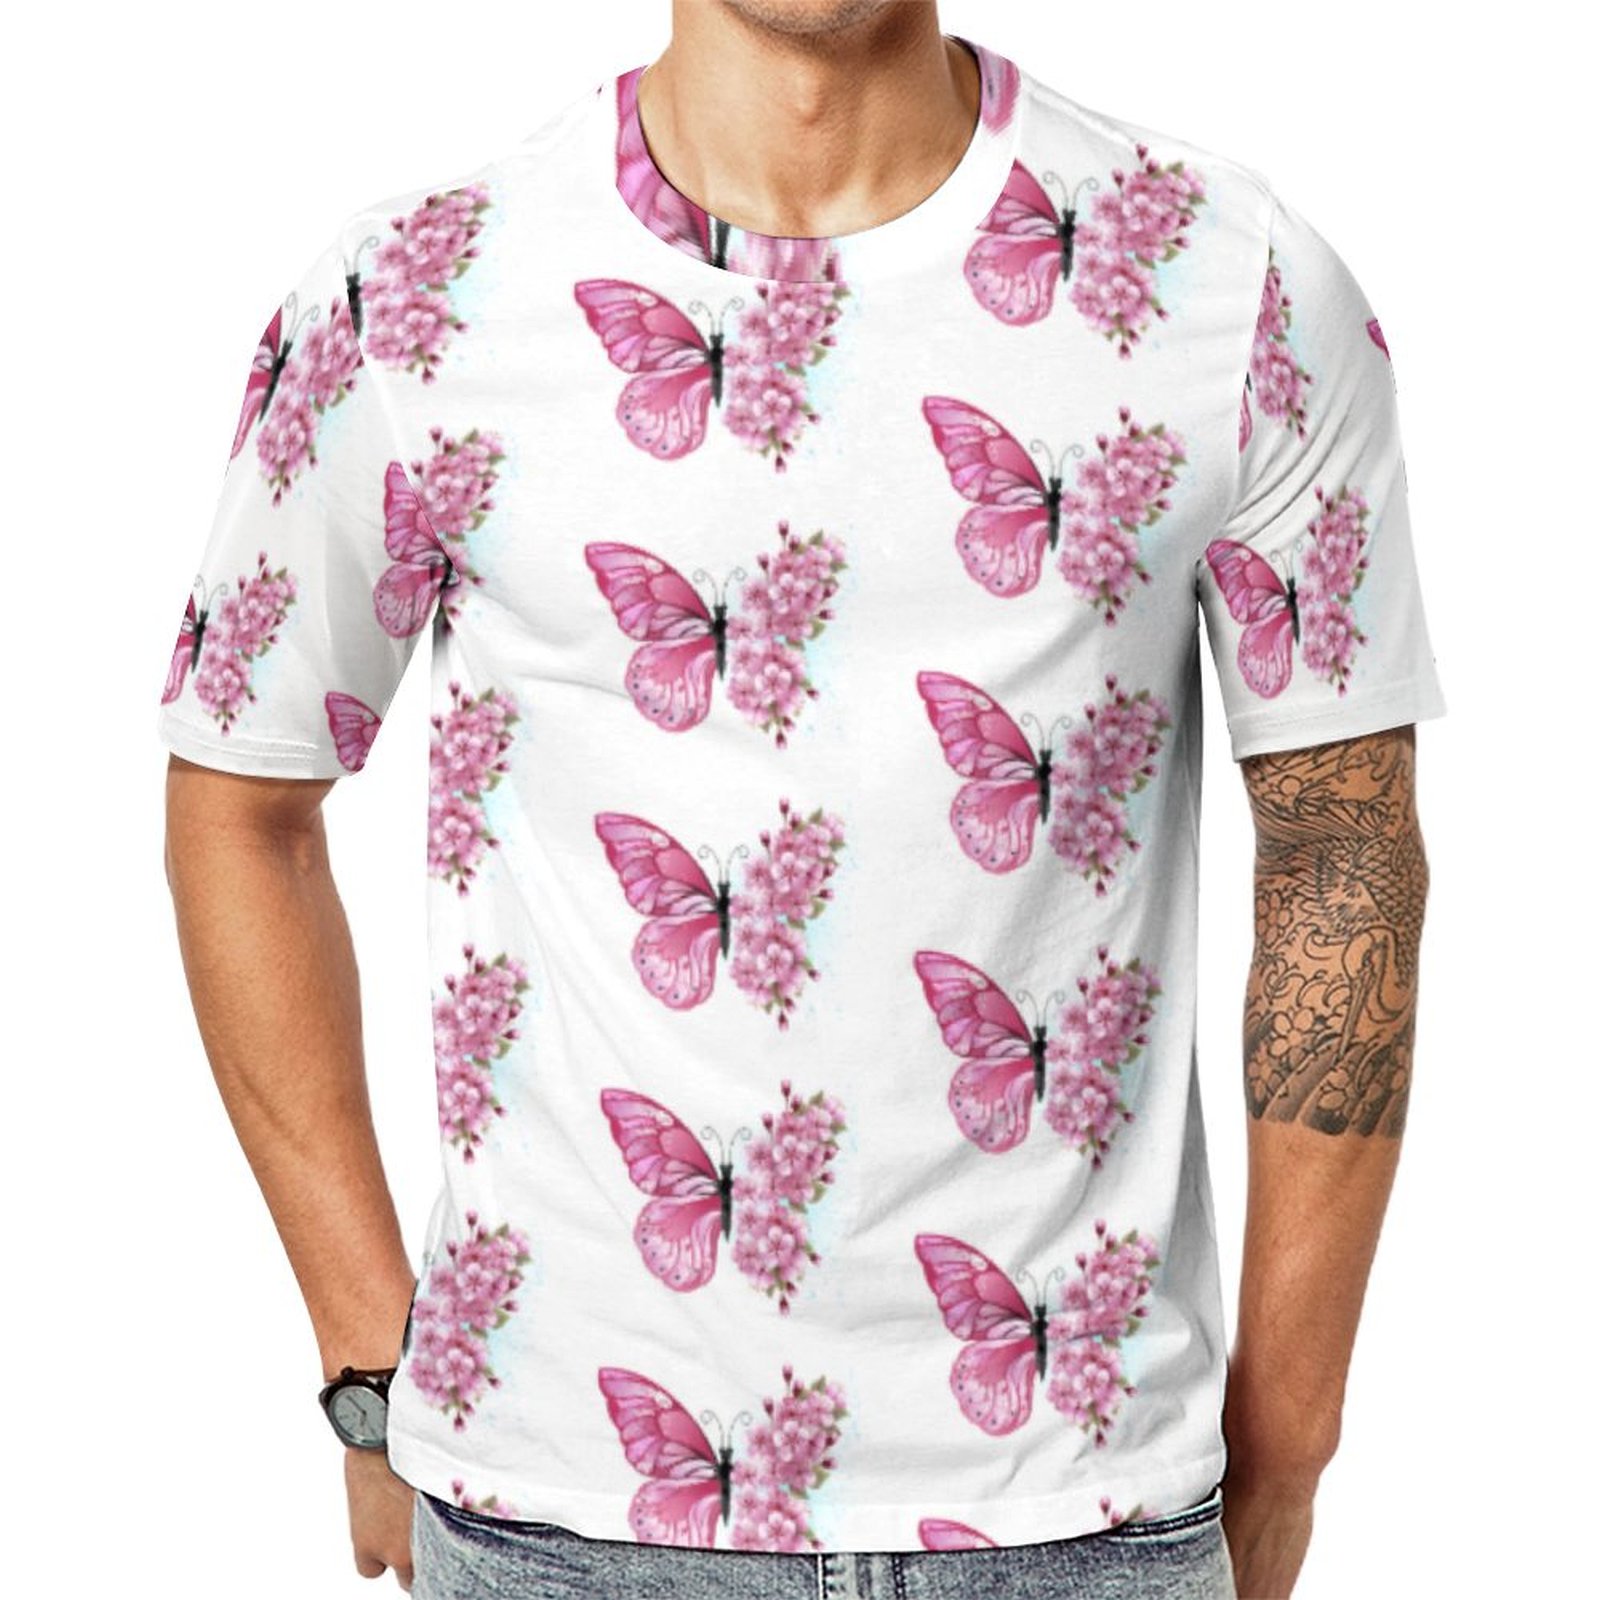 Flower Butterfly With Pink Sakura Short Sleeve Print Unisex Tshirt Summer Casual Tees for Men and Women Coolcoshirts